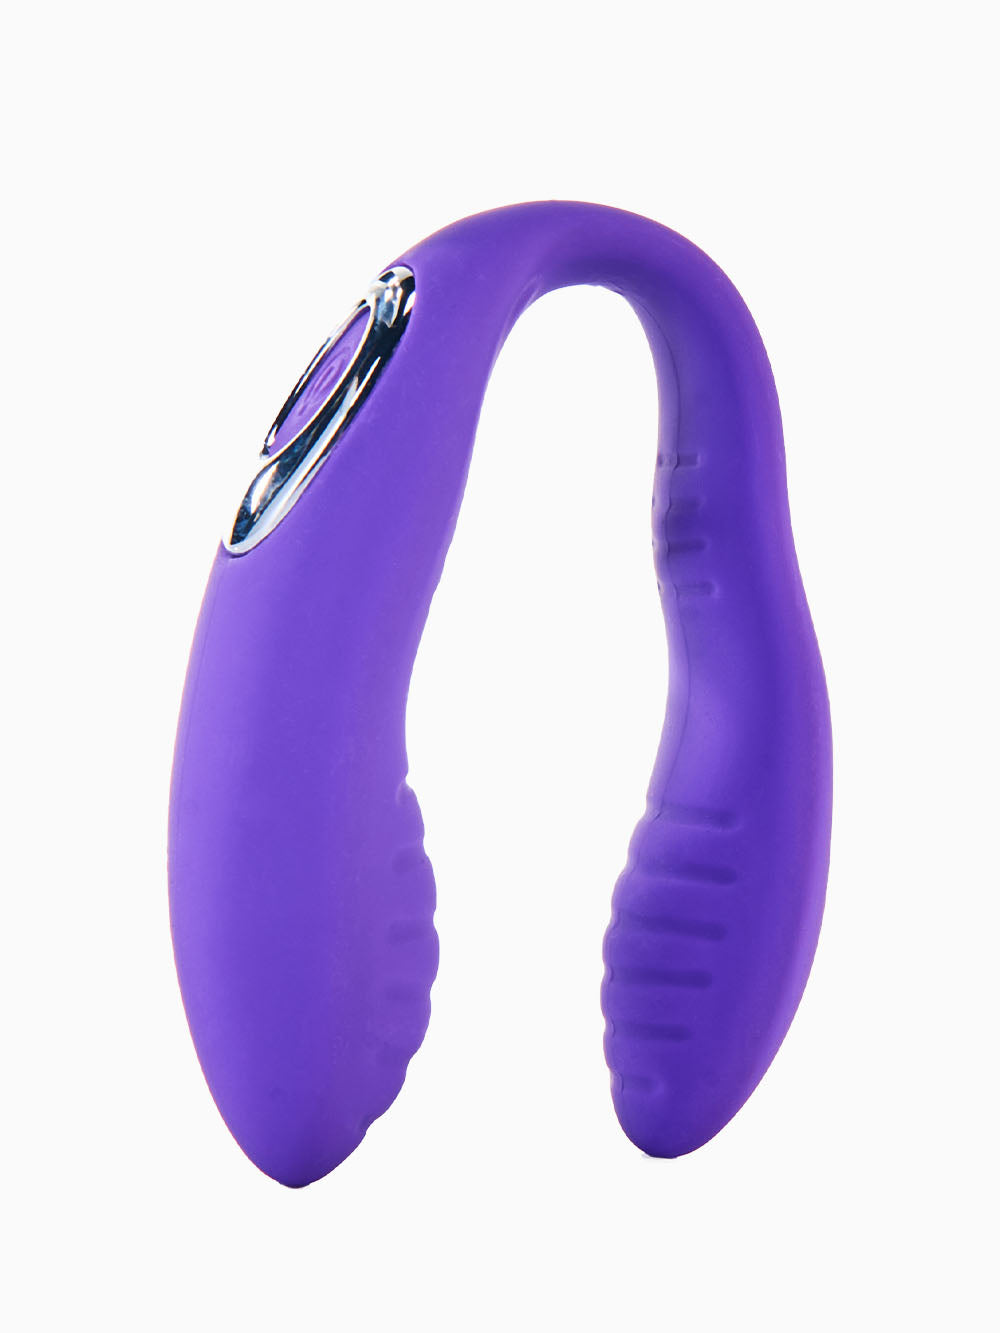 Pillow Talk Dual Mouth And Clitoral Vibrator Purple, 3 Inches